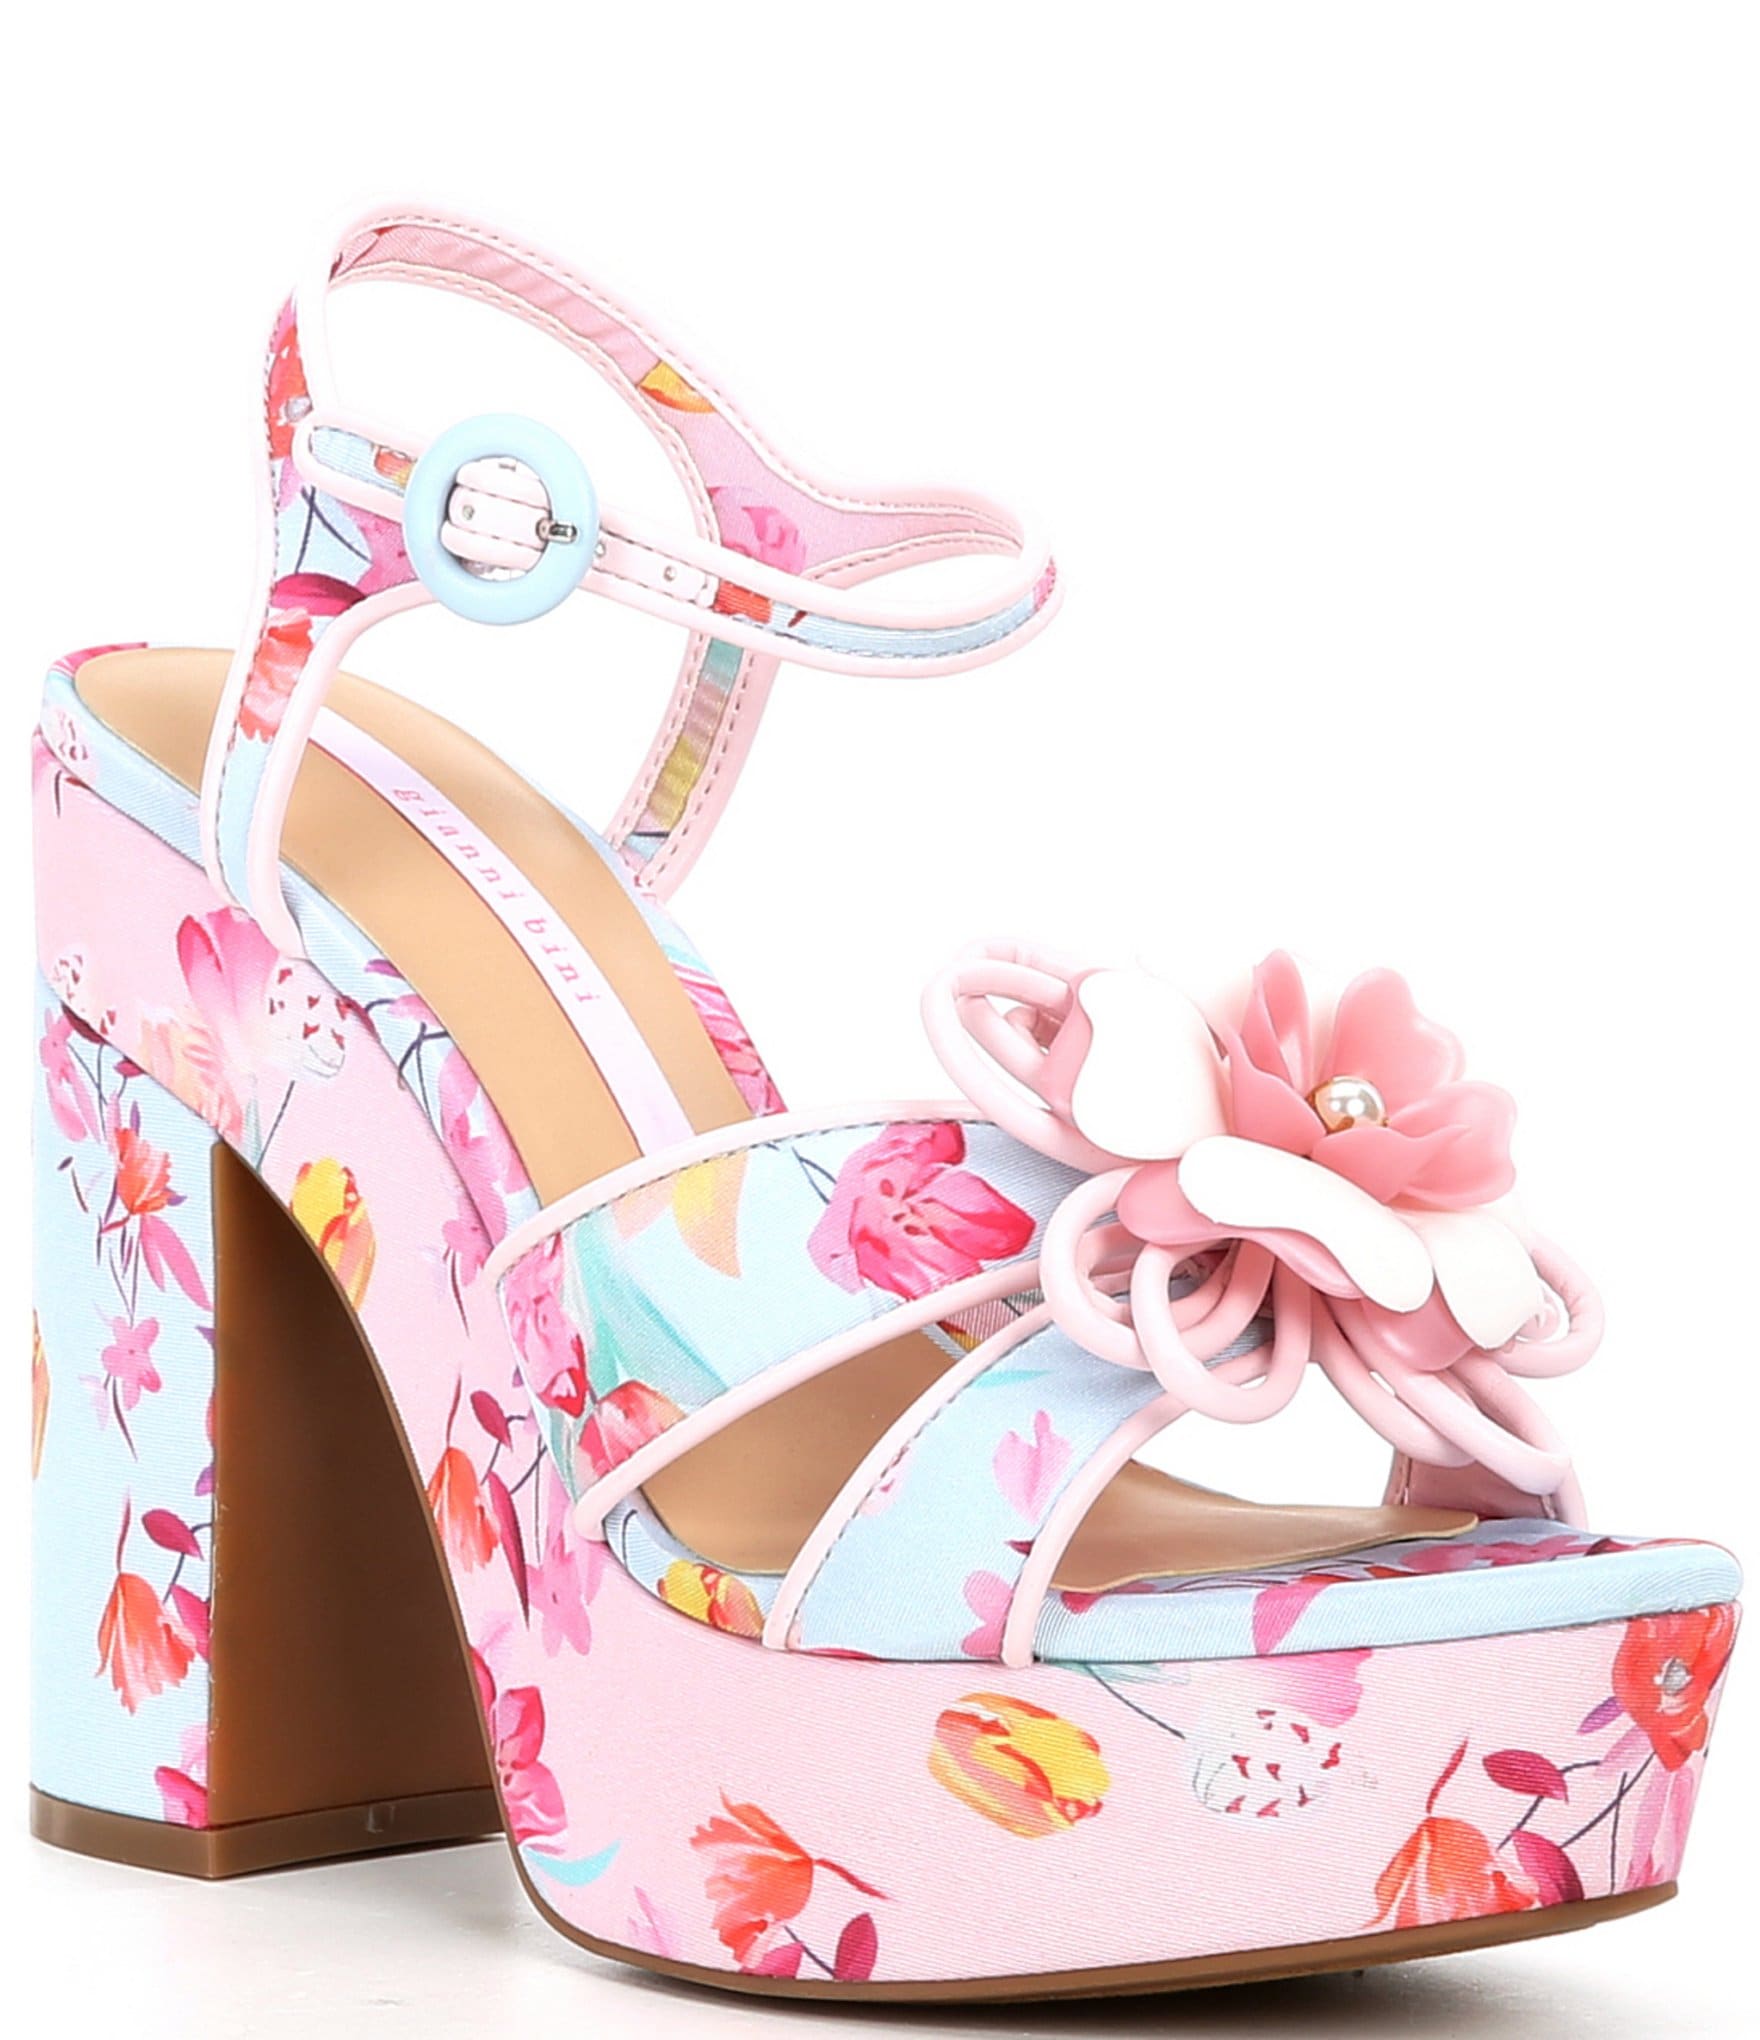 Buy Vintage Style Gorgeous Floral Psychedelic Satin Platform Shoes With  Peep Toes UK6 US8 EU39 Never Worn Online in India - Etsy